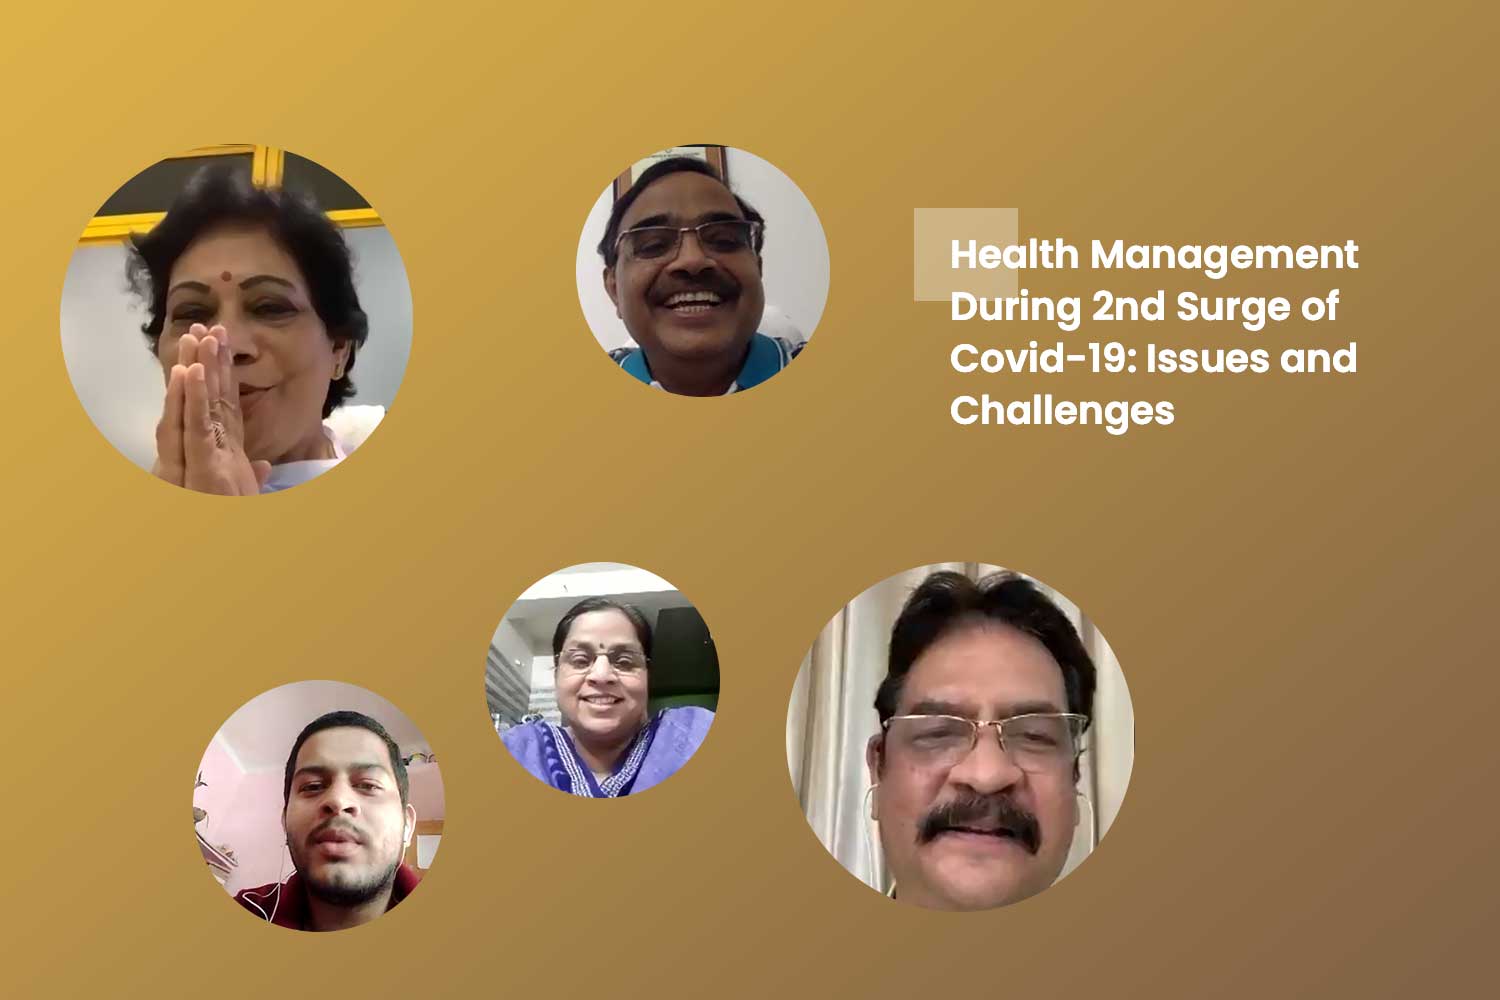 Health Management During Covid & challenges